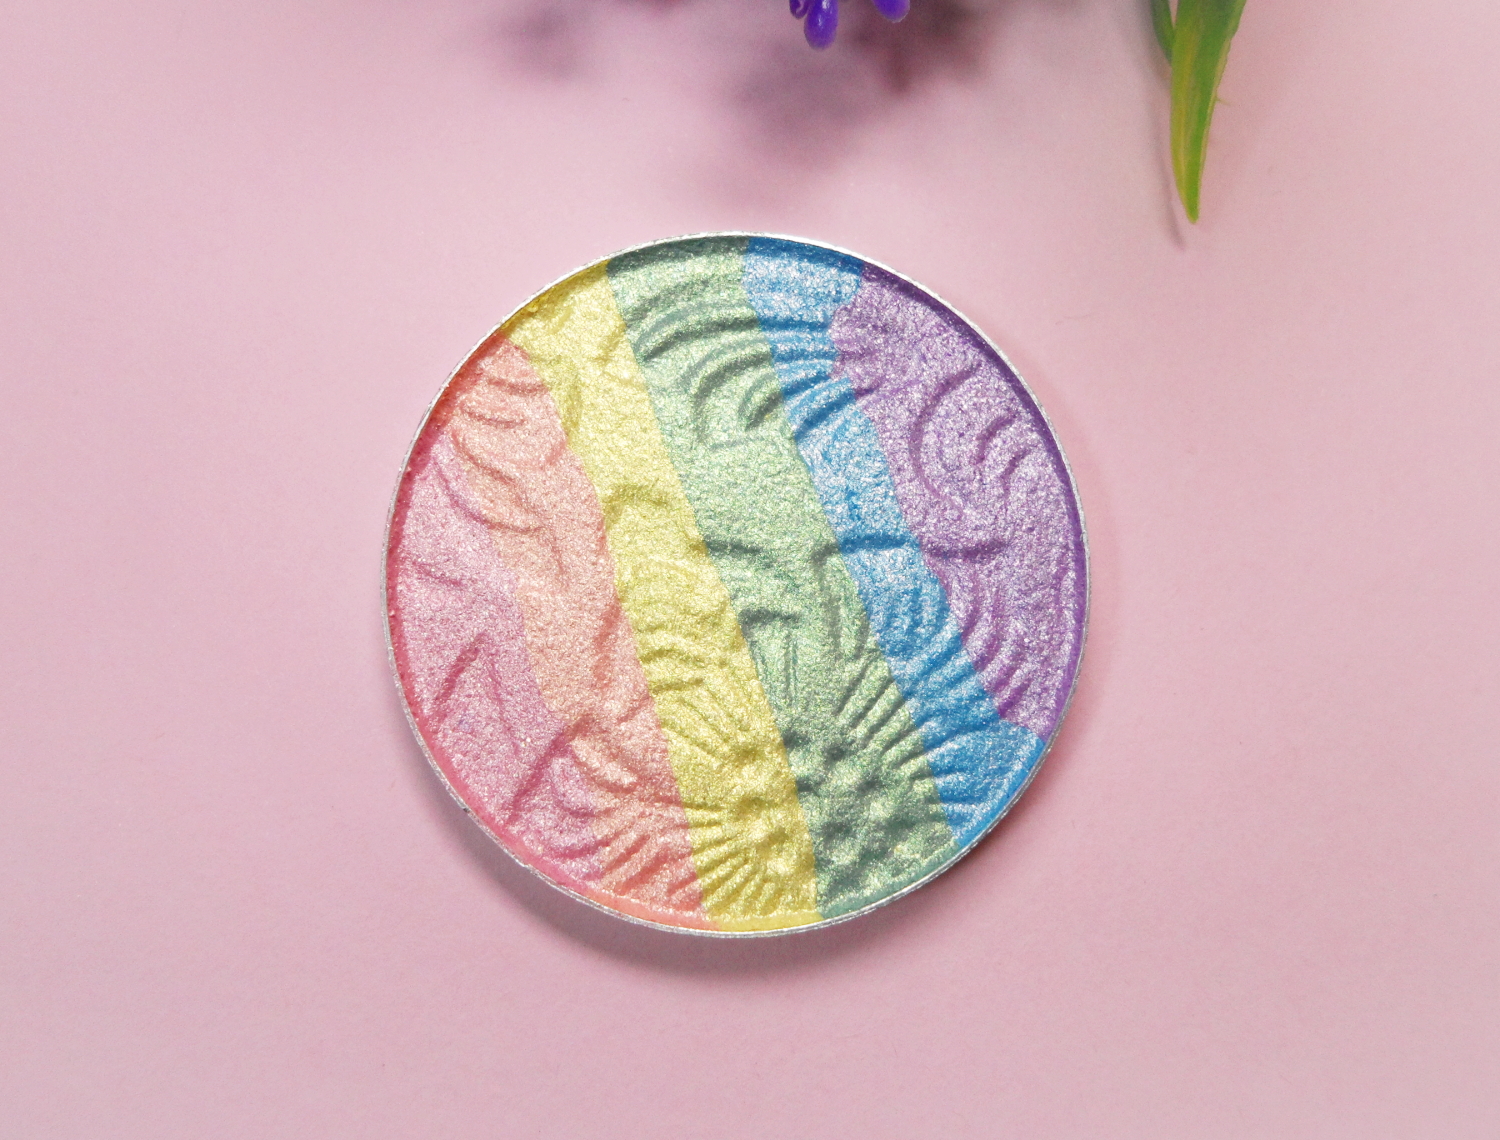 rainbow highlighter close-up on a rosy studio's background